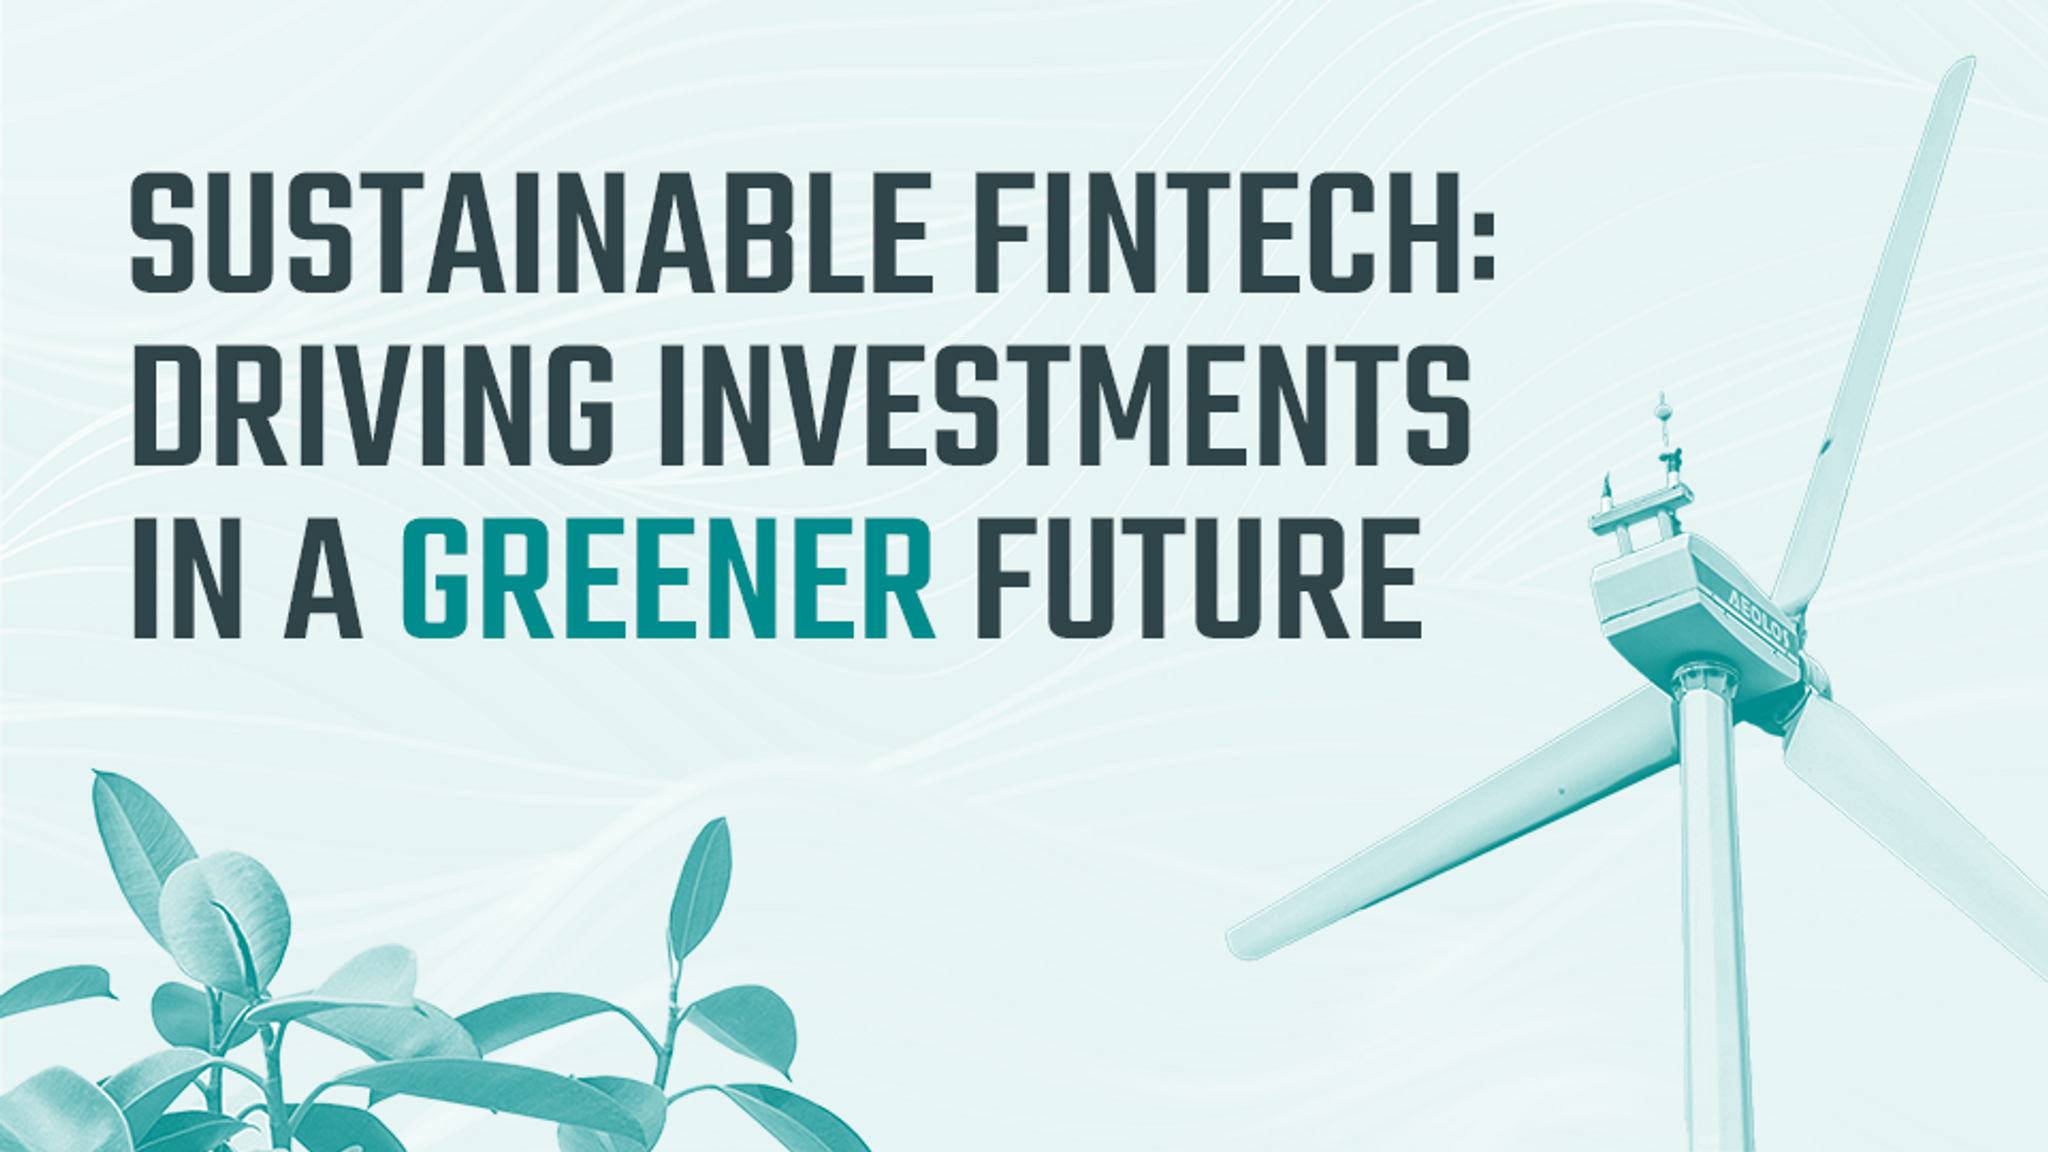 Sustainable Fintech: Driving Investments in a Greener Future